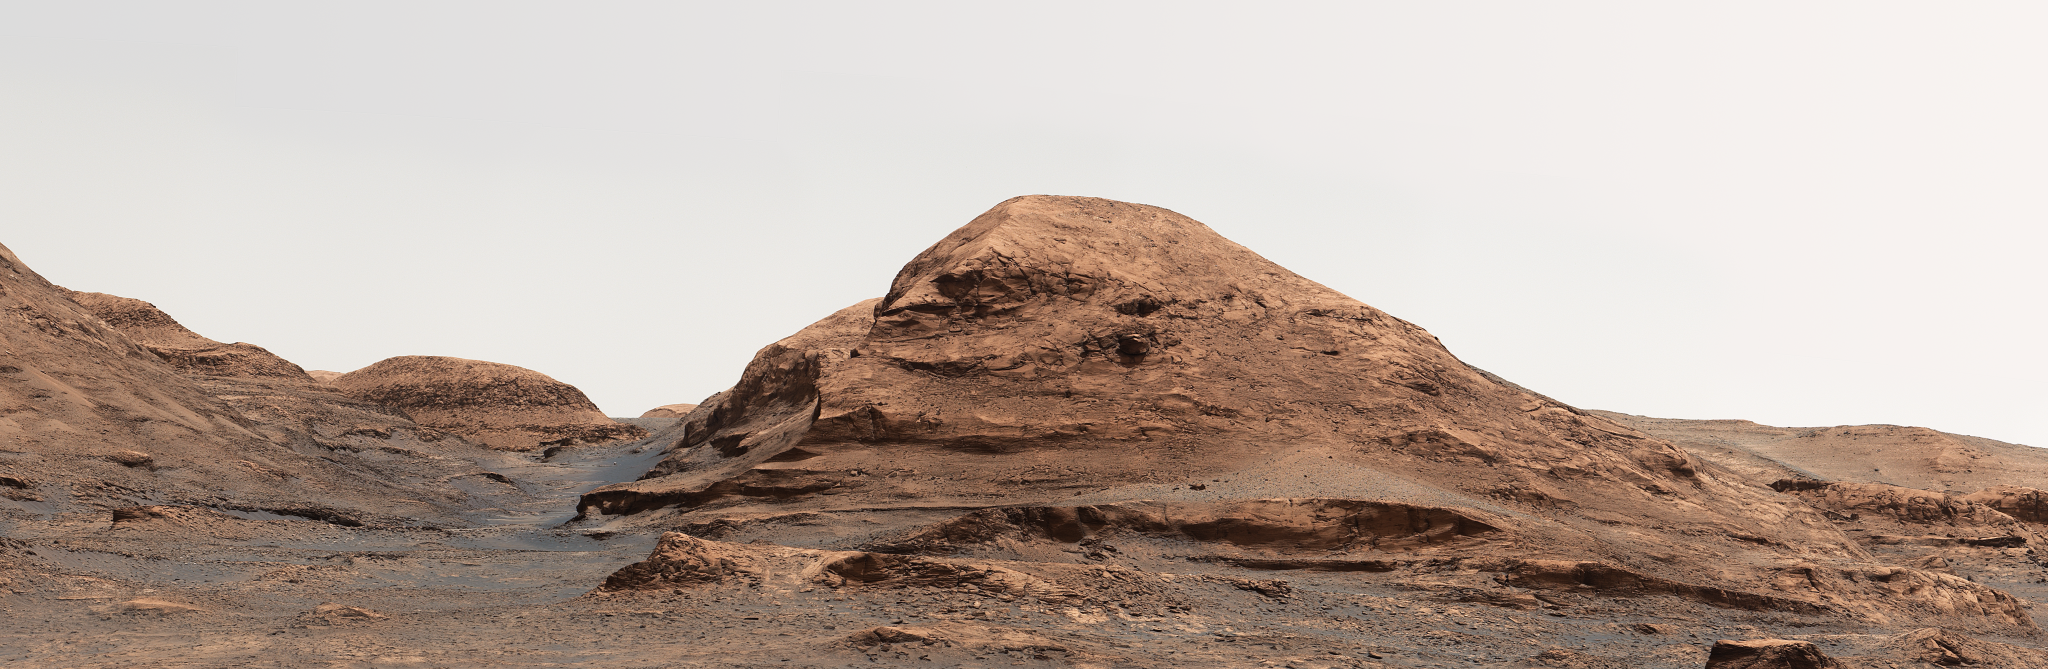 Image of Martian hills from Curiosity rover.